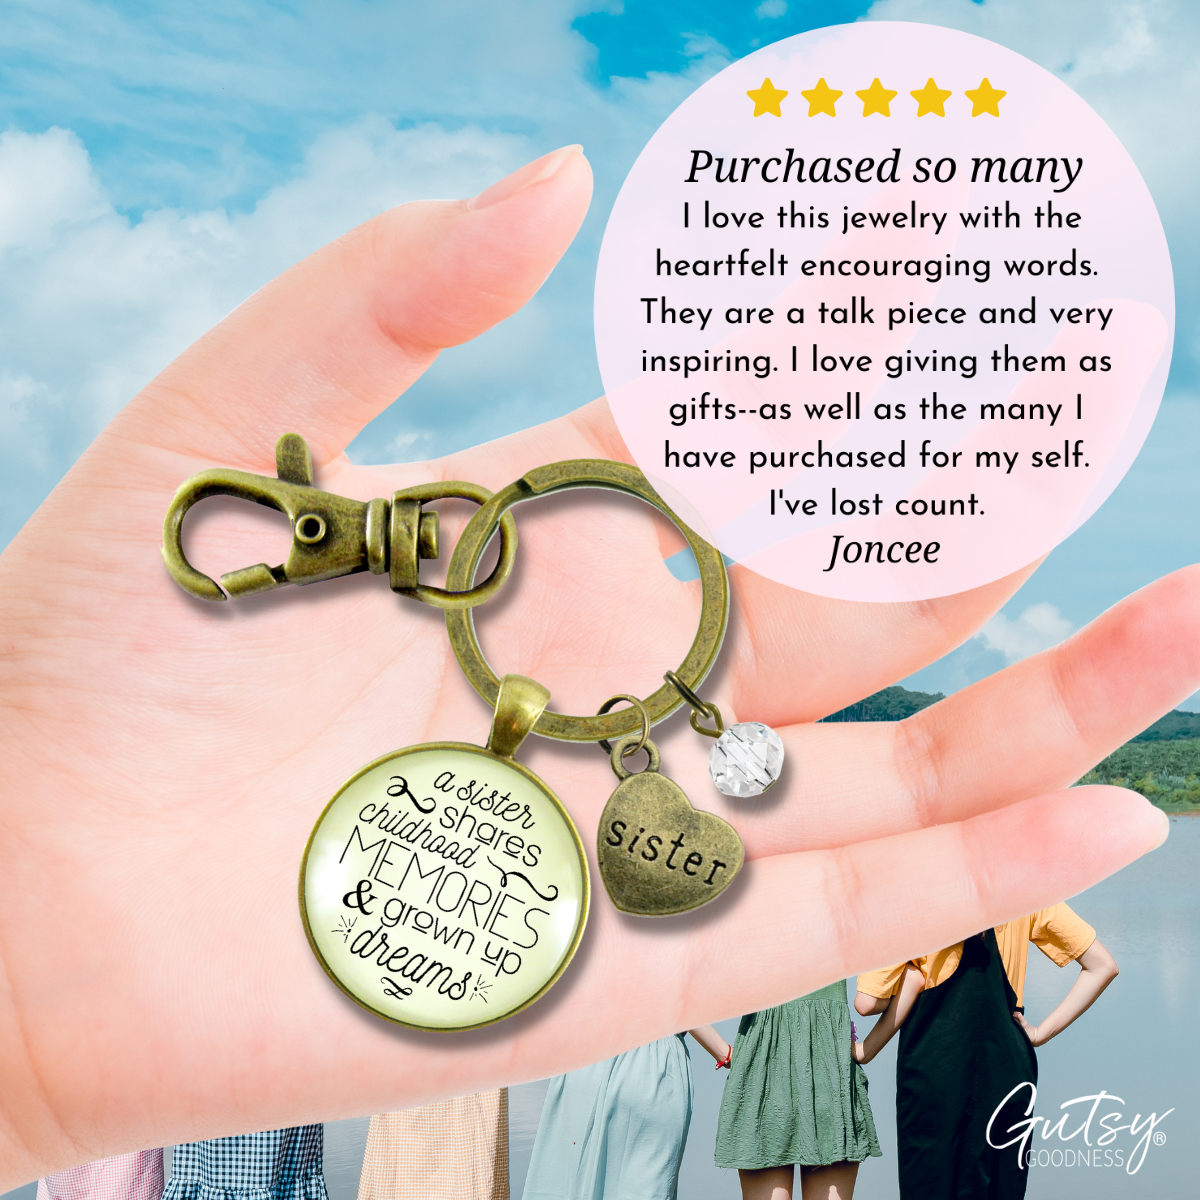 Sisters Keychain A Sister Shares Childhood Memories Meaningful Jewelry Gift For Women Sisterhood - Gutsy Goodness Handmade Jewelry;Sisters Keychain A Sister Shares Childhood Memories Meaningful Jewelry Gift For Women Sisterhood - Gutsy Goodness Handmade Jewelry Gifts